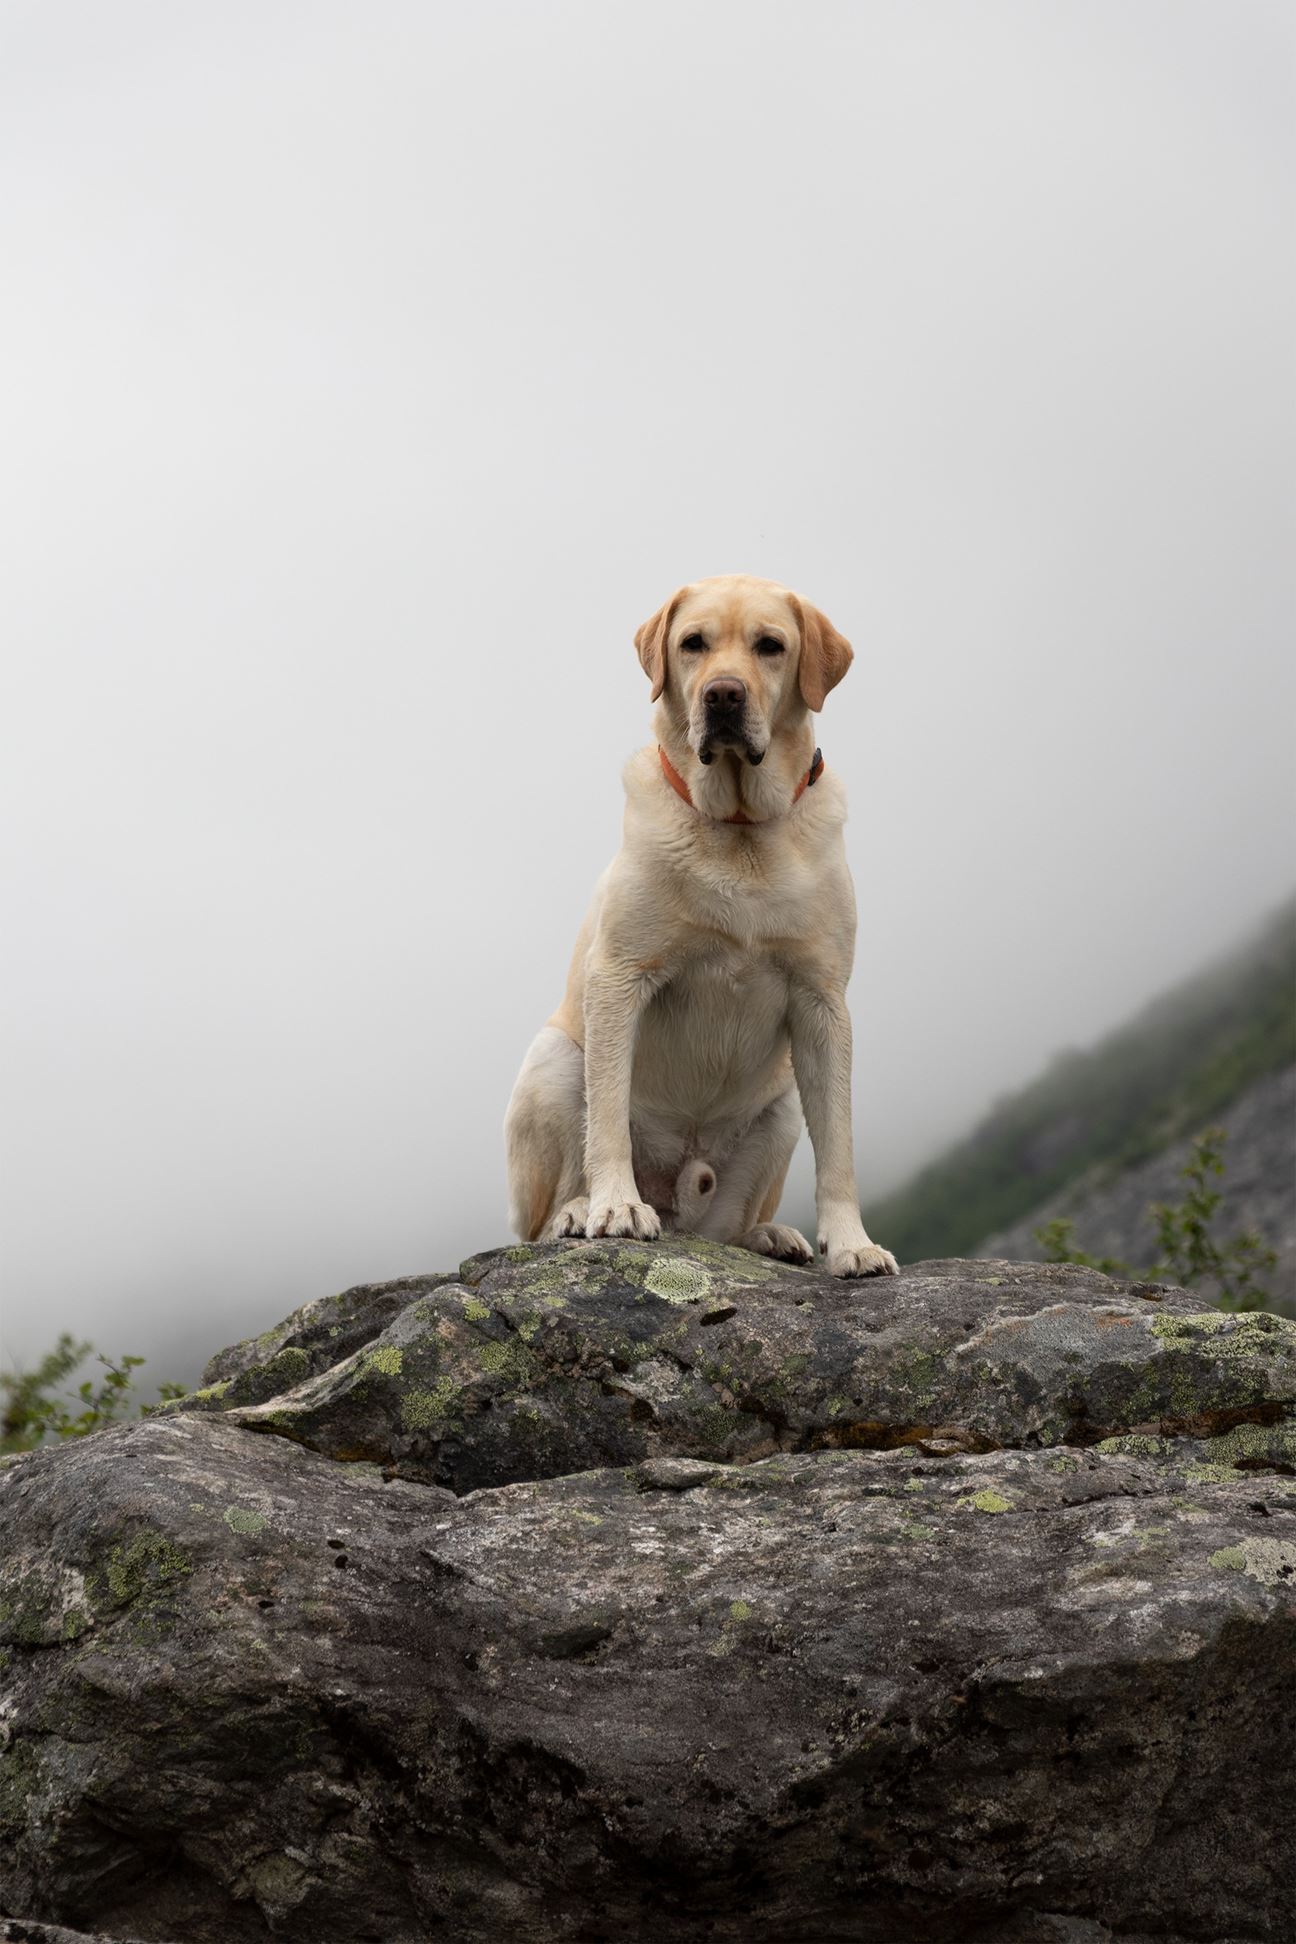 A yellow Labrador Retriever sitting on a mossy rock in a foggy mountain landscape